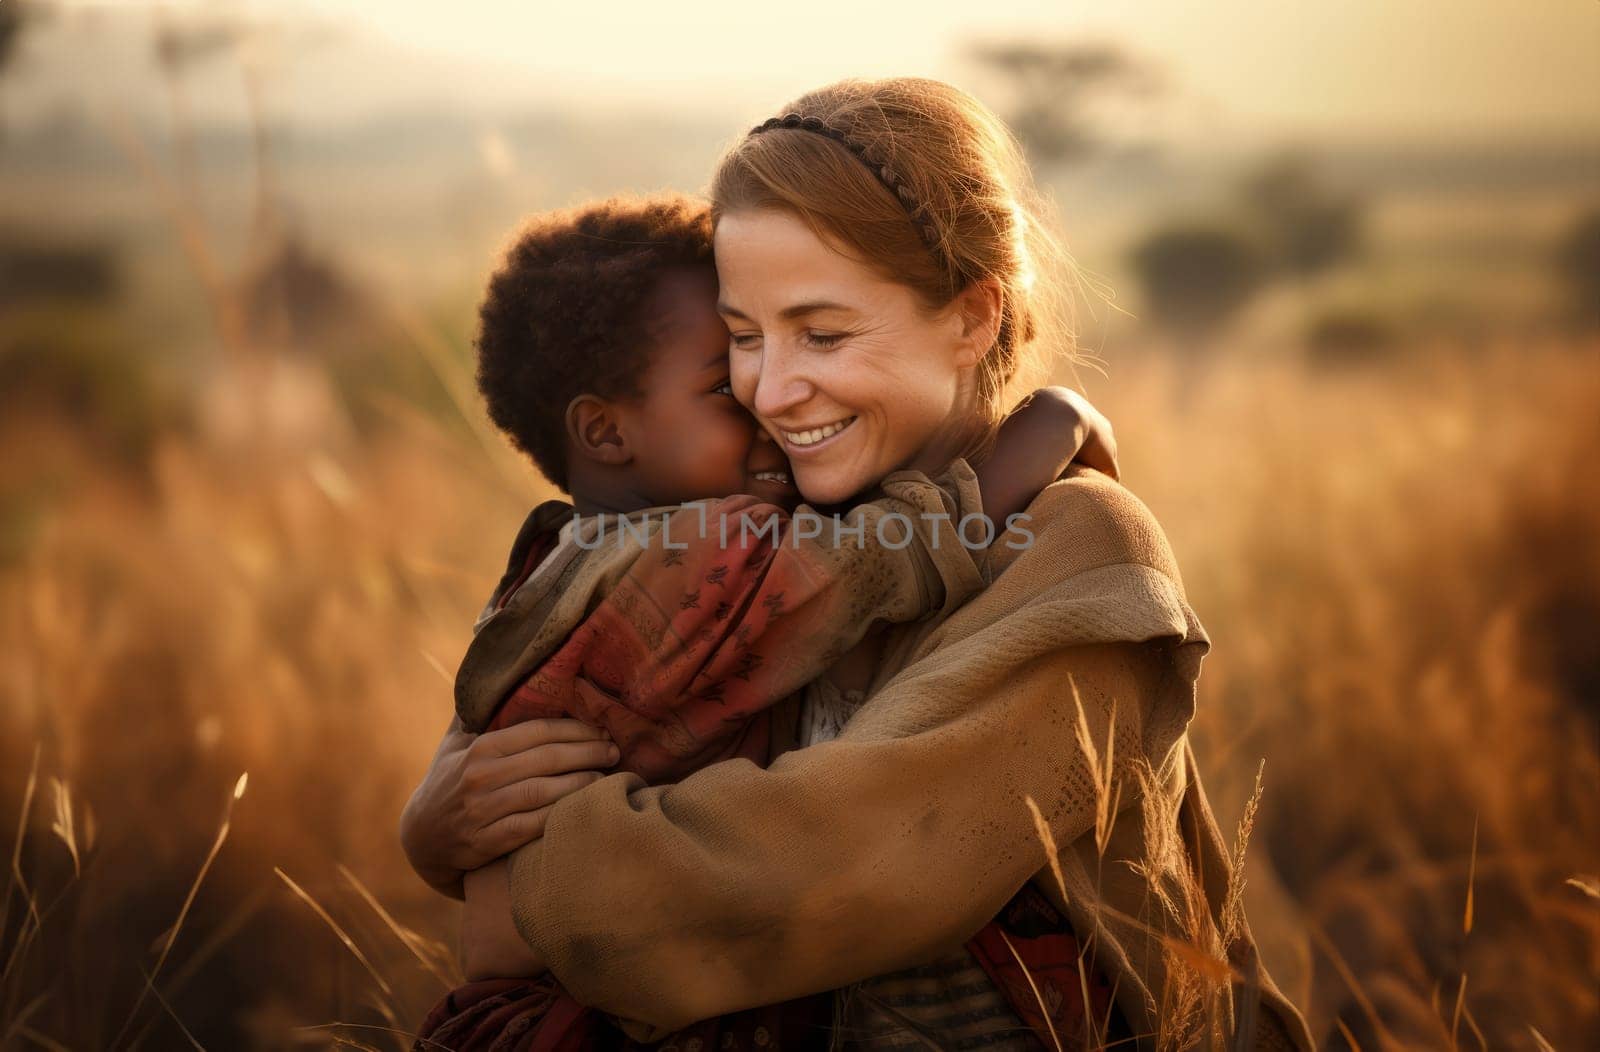 Cross-Cultural Compassion.European Volunteer Embraces African-American Child in African Desert.Generated image by dotshock